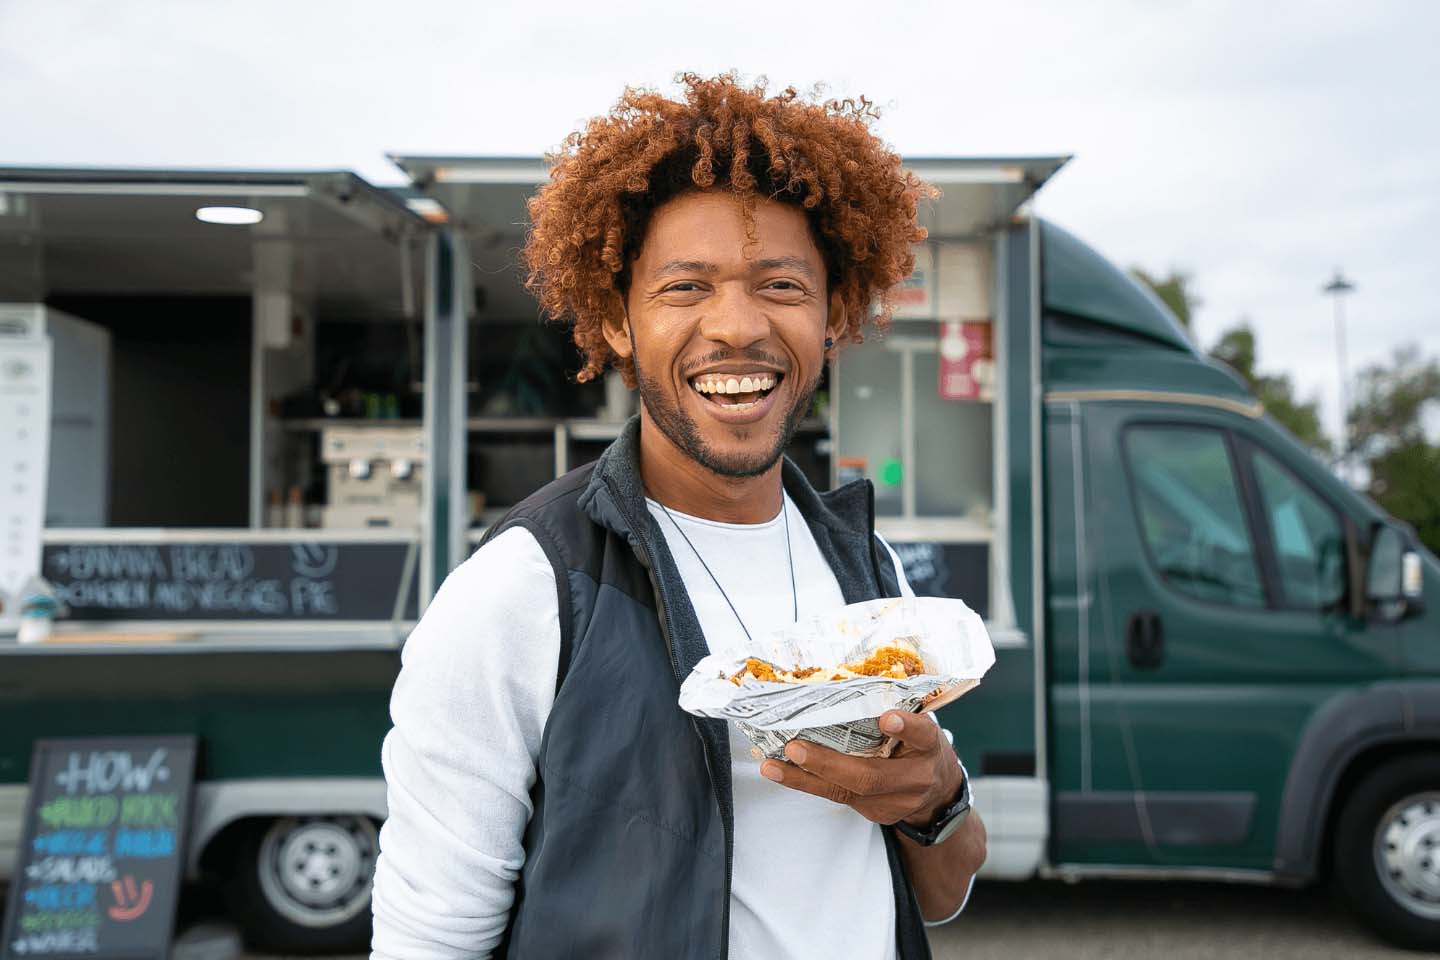 Smiling customer with food outside a food truck